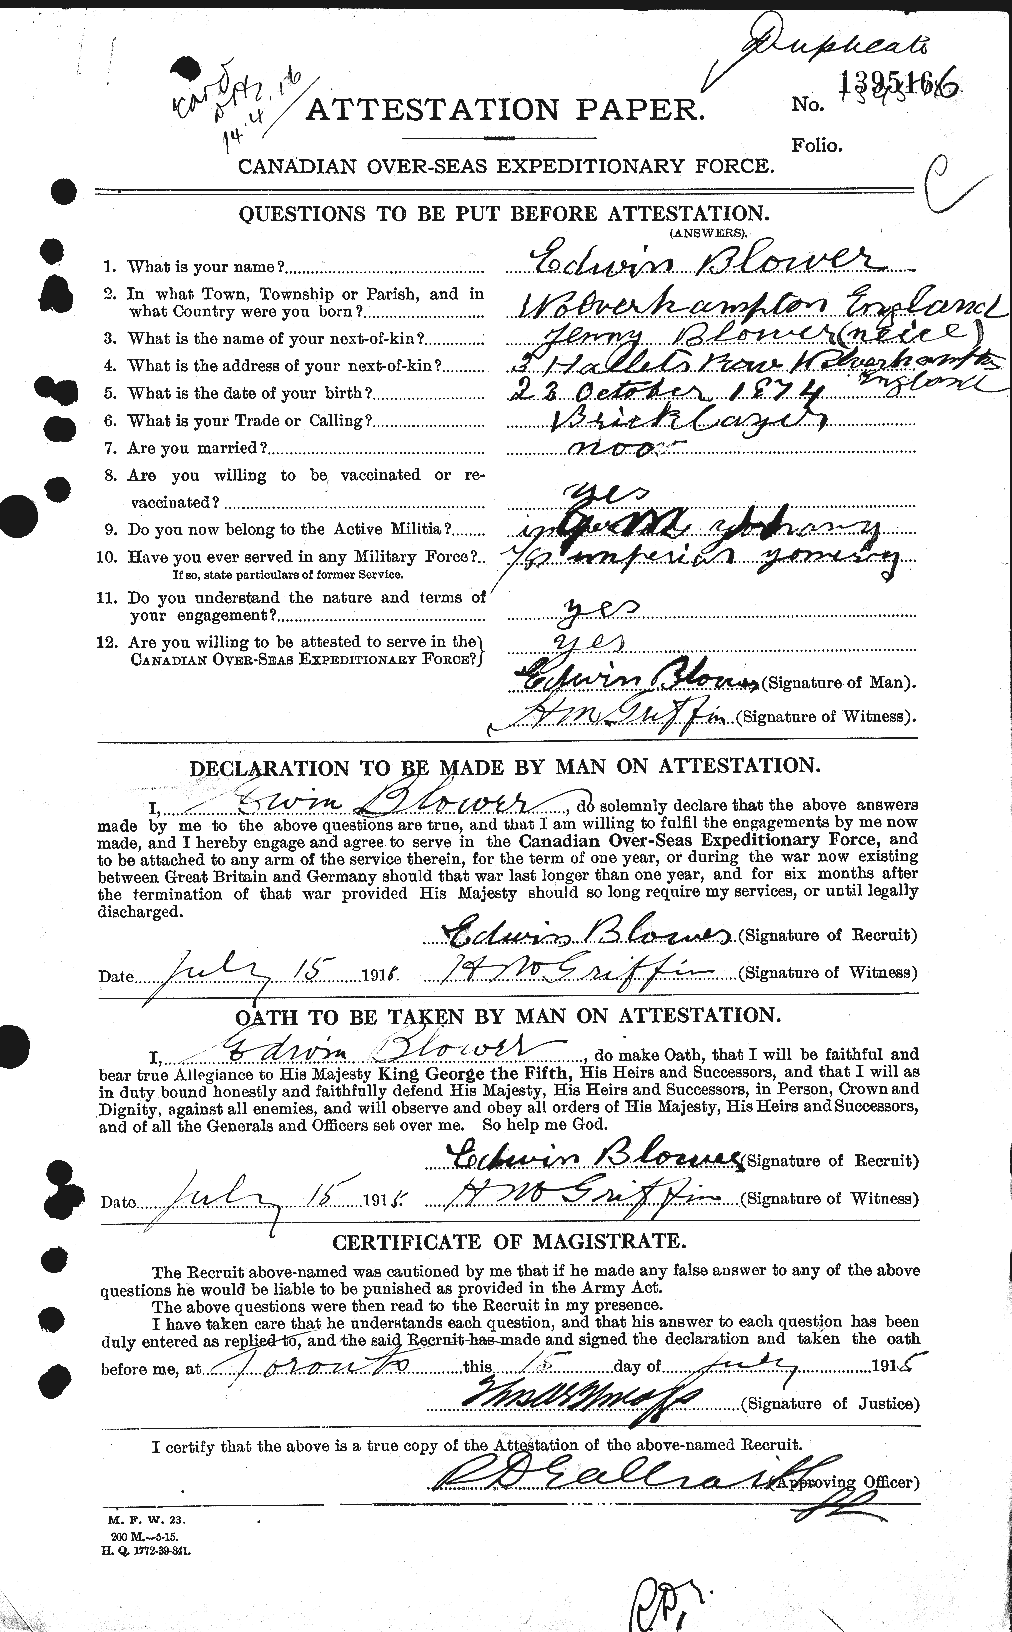 Personnel Records of the First World War - CEF 247434a